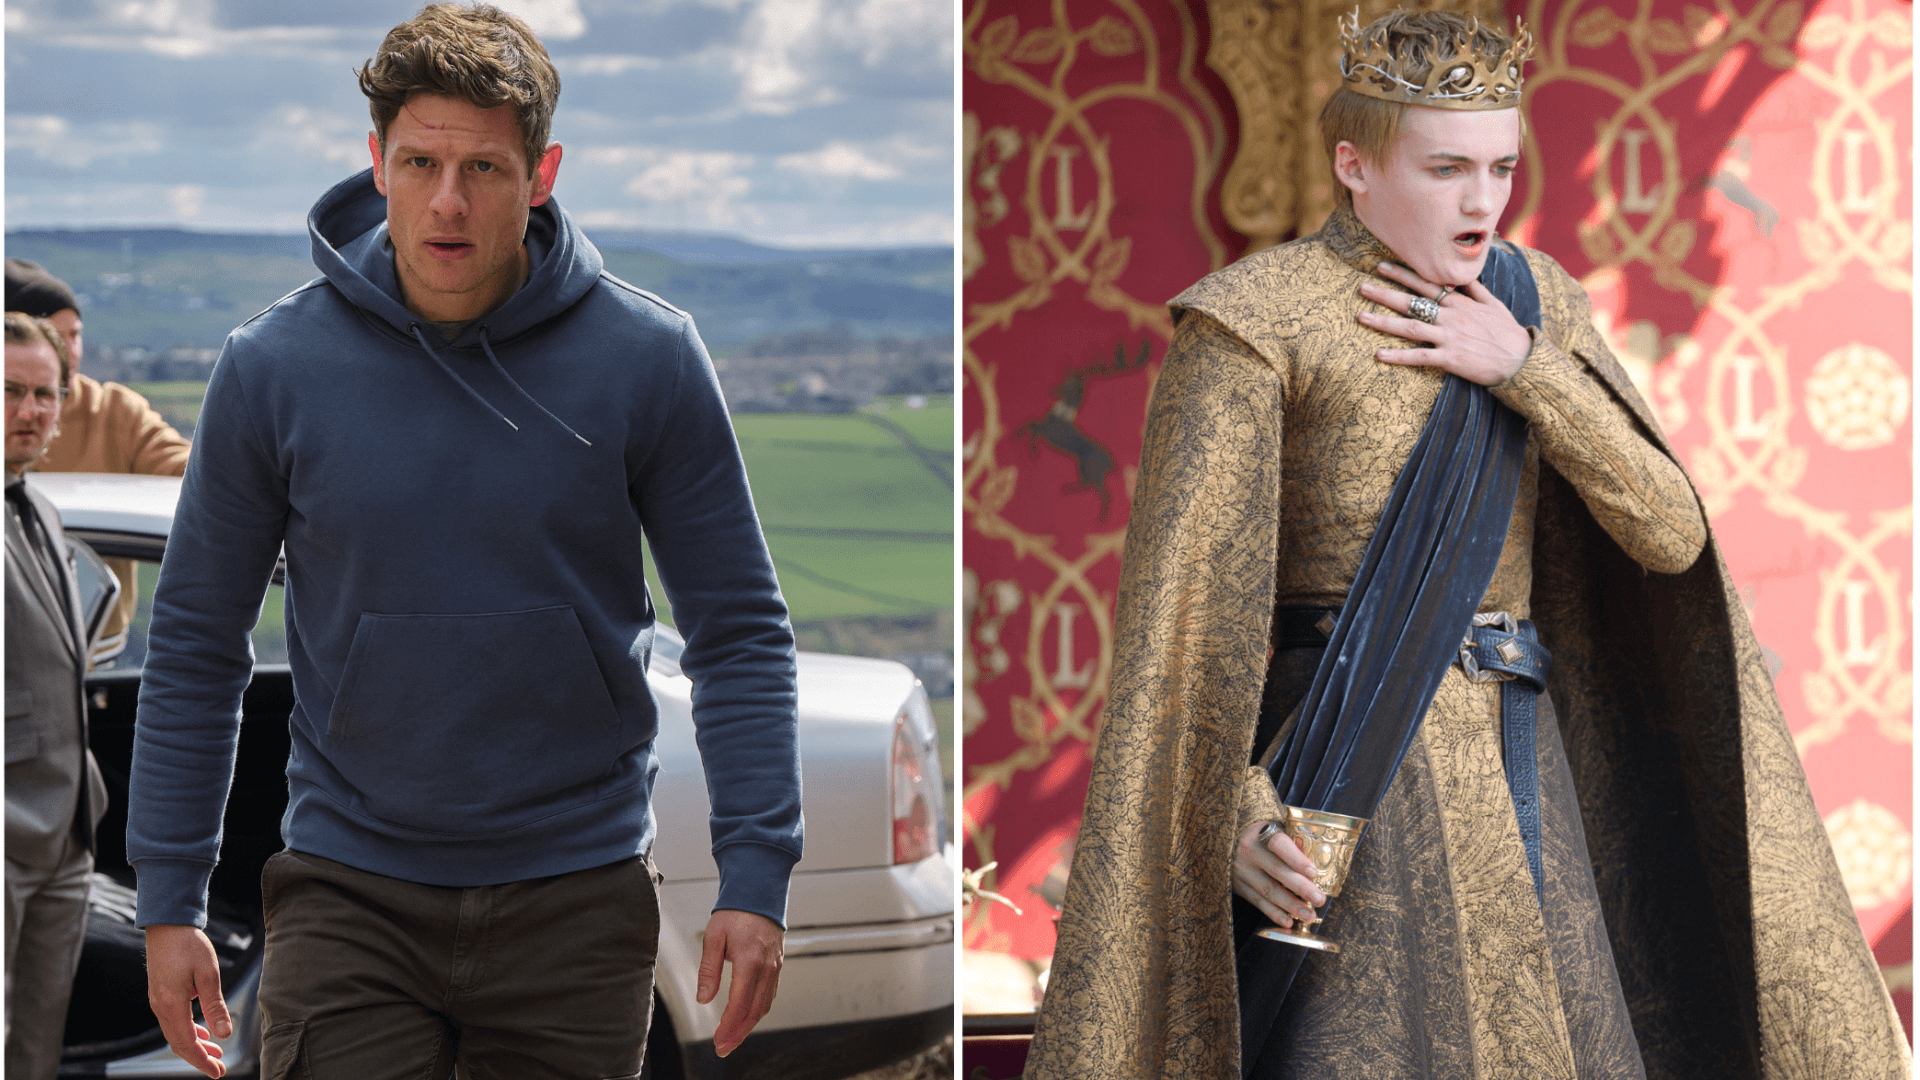 Happy Valley and Game of Thrones stars lead huge new Netflix drama as cast revealed [Video]